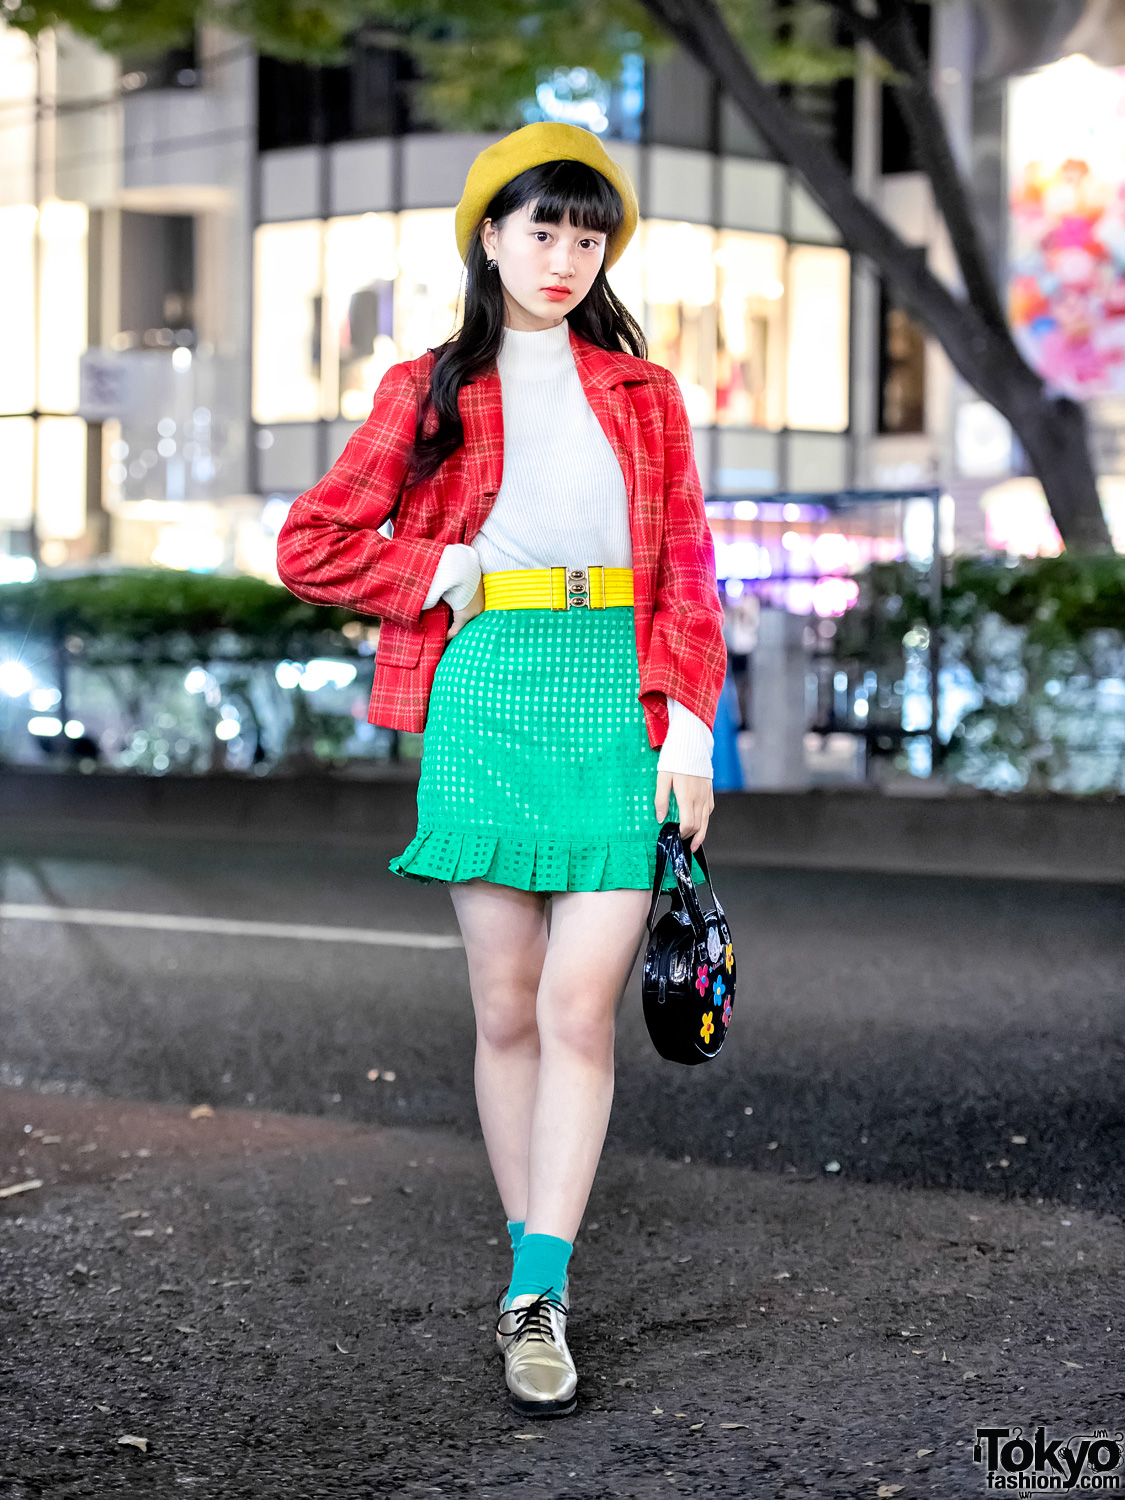 Japanese Actress in Harajuku w/ Colorful Retro Vintage Street Style, G2? & Chanel